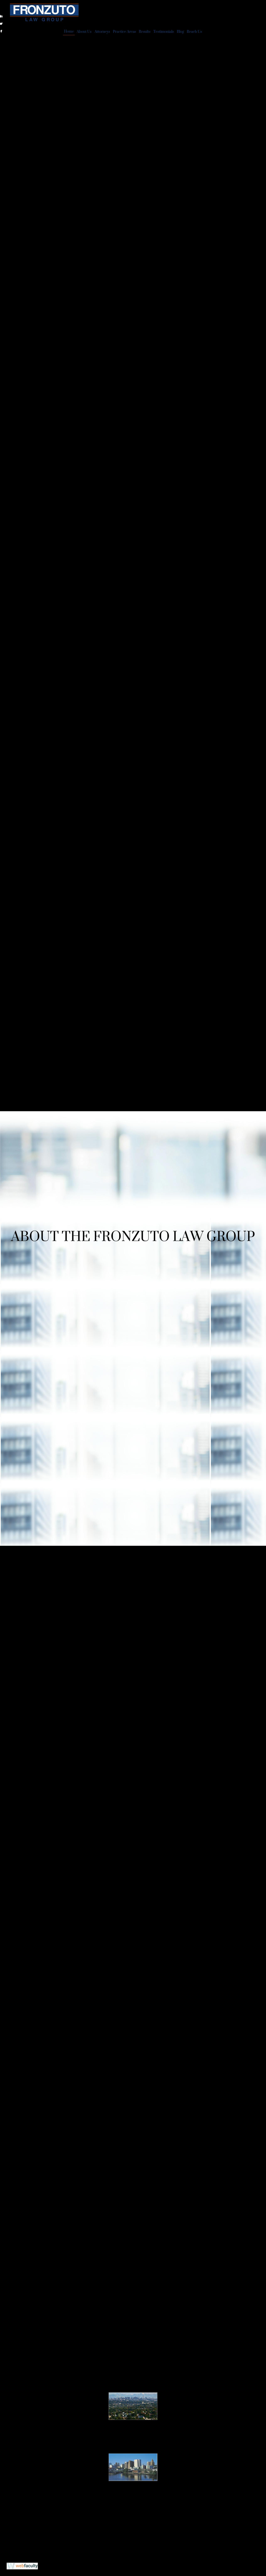 Fronzuto Law Group - New York NY Lawyers